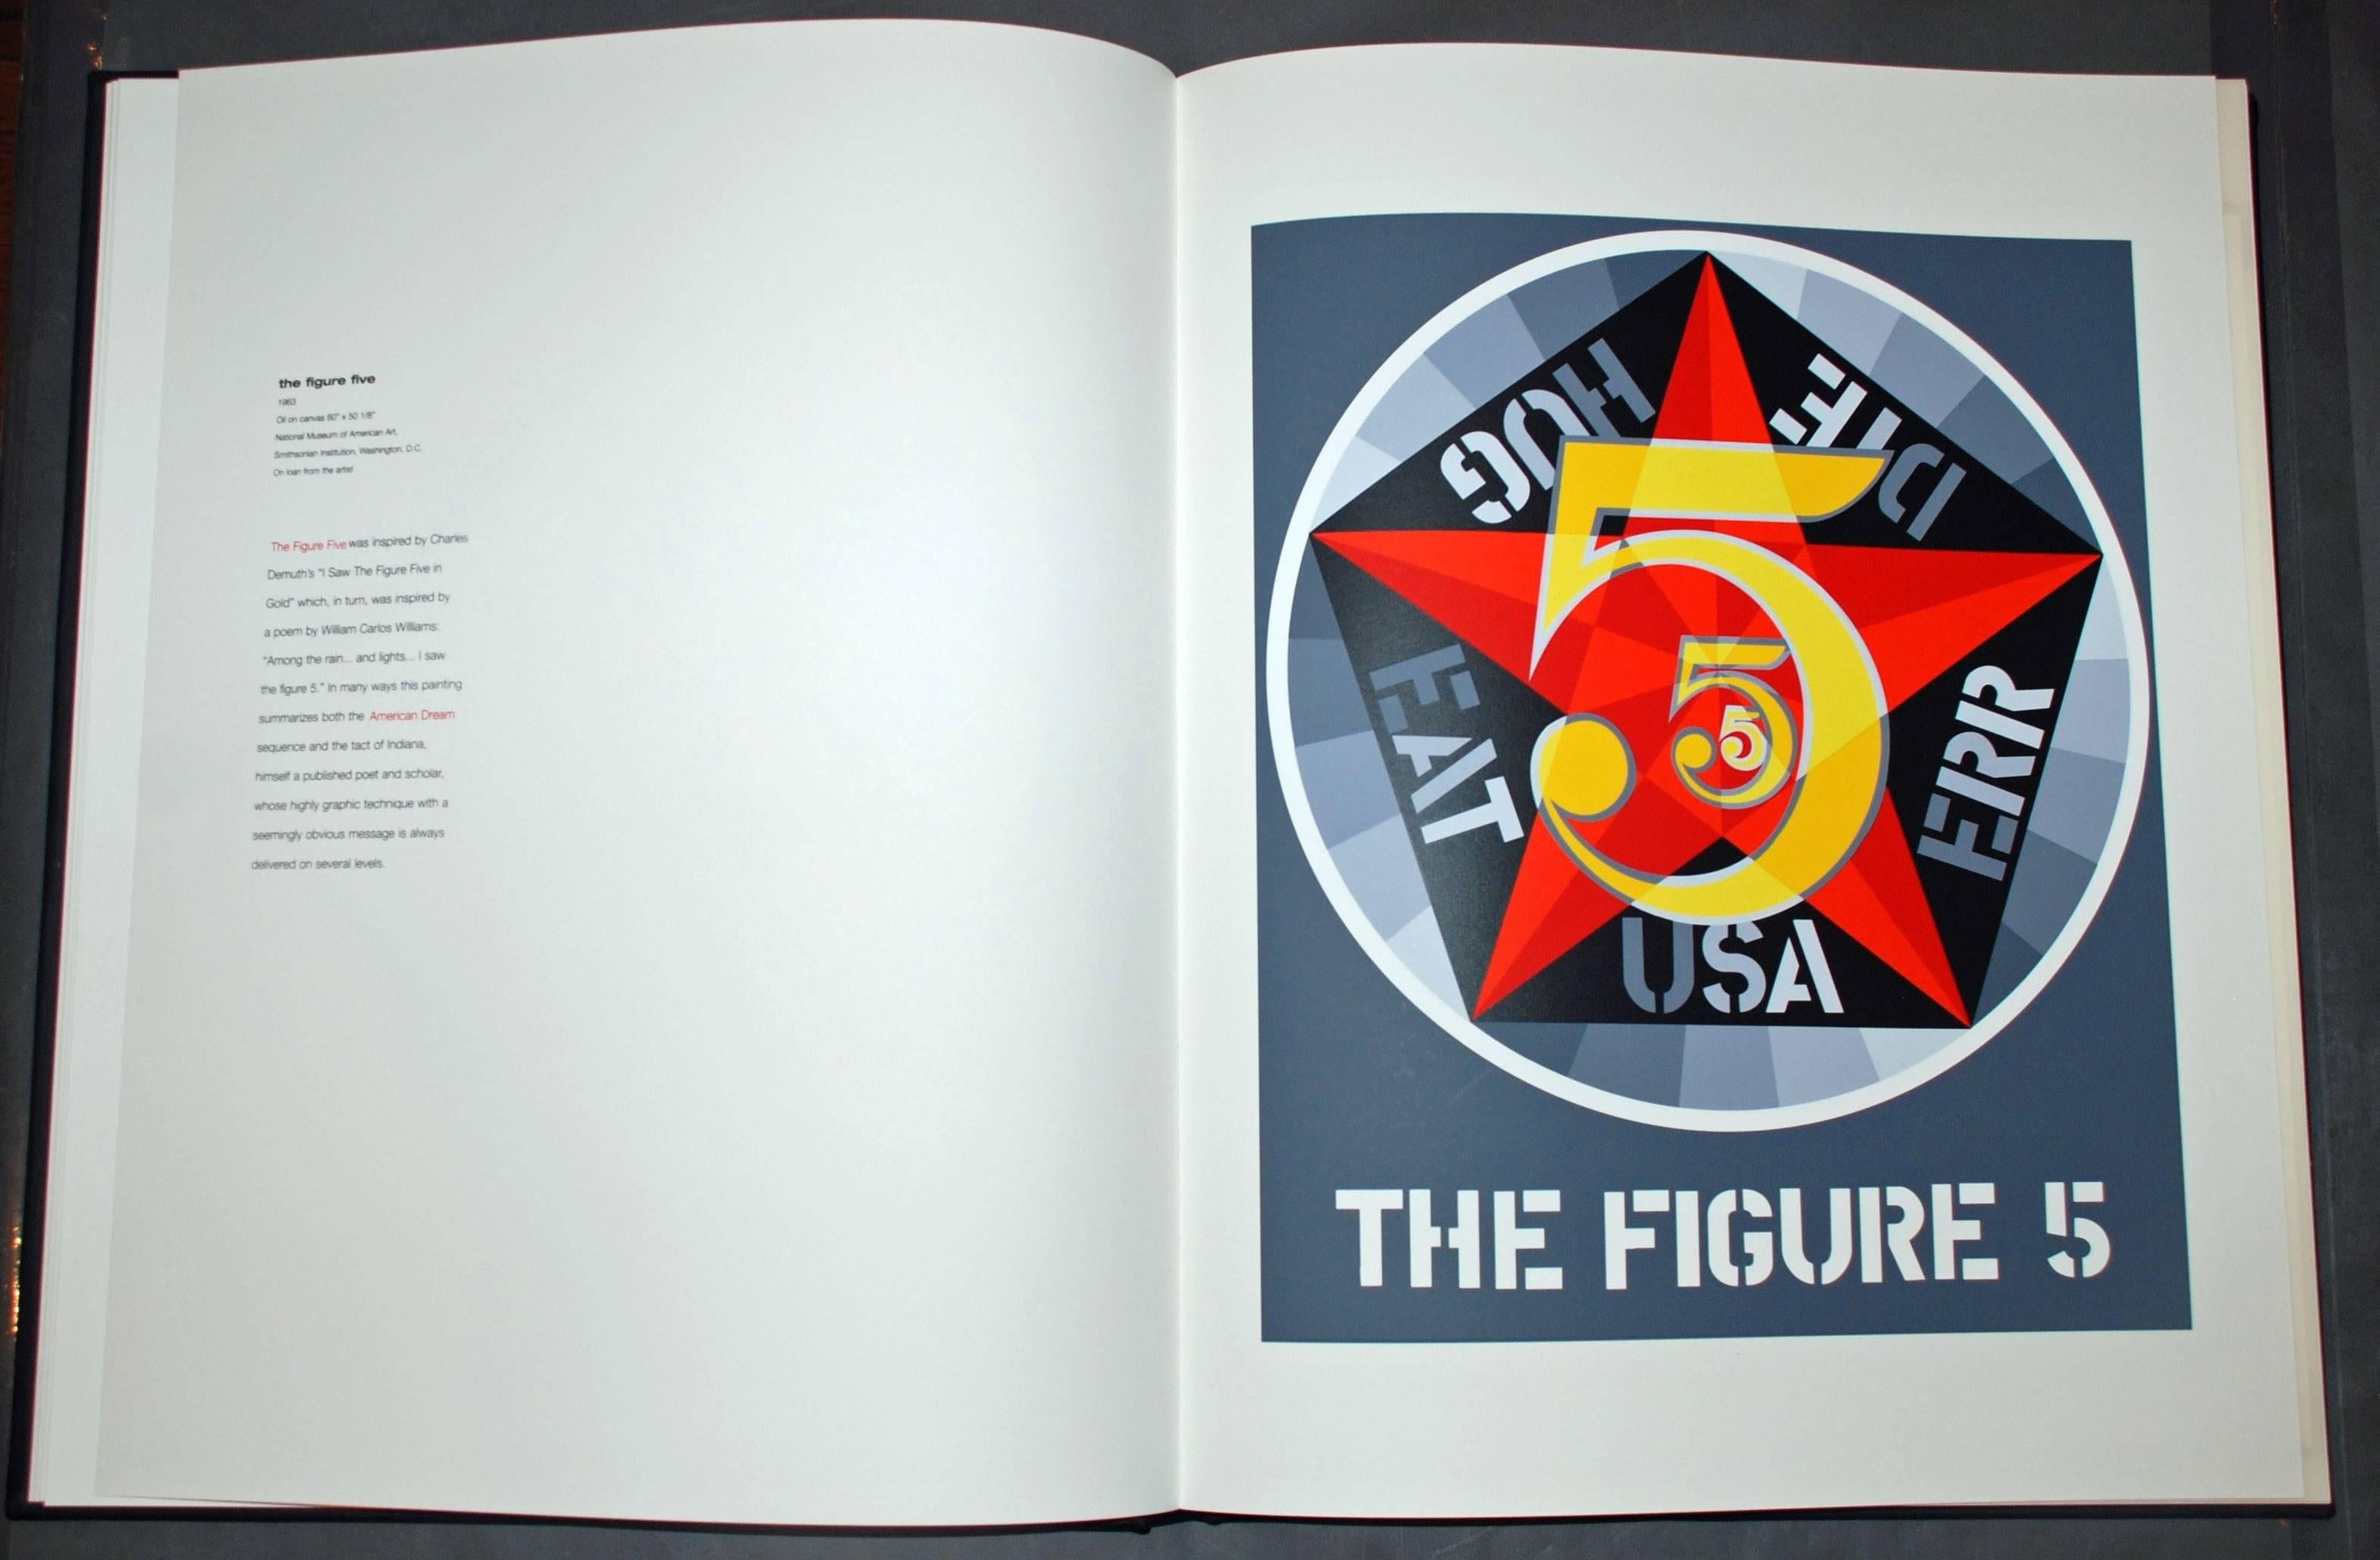 The Figure Five, from The American Dream - Print by Robert Indiana